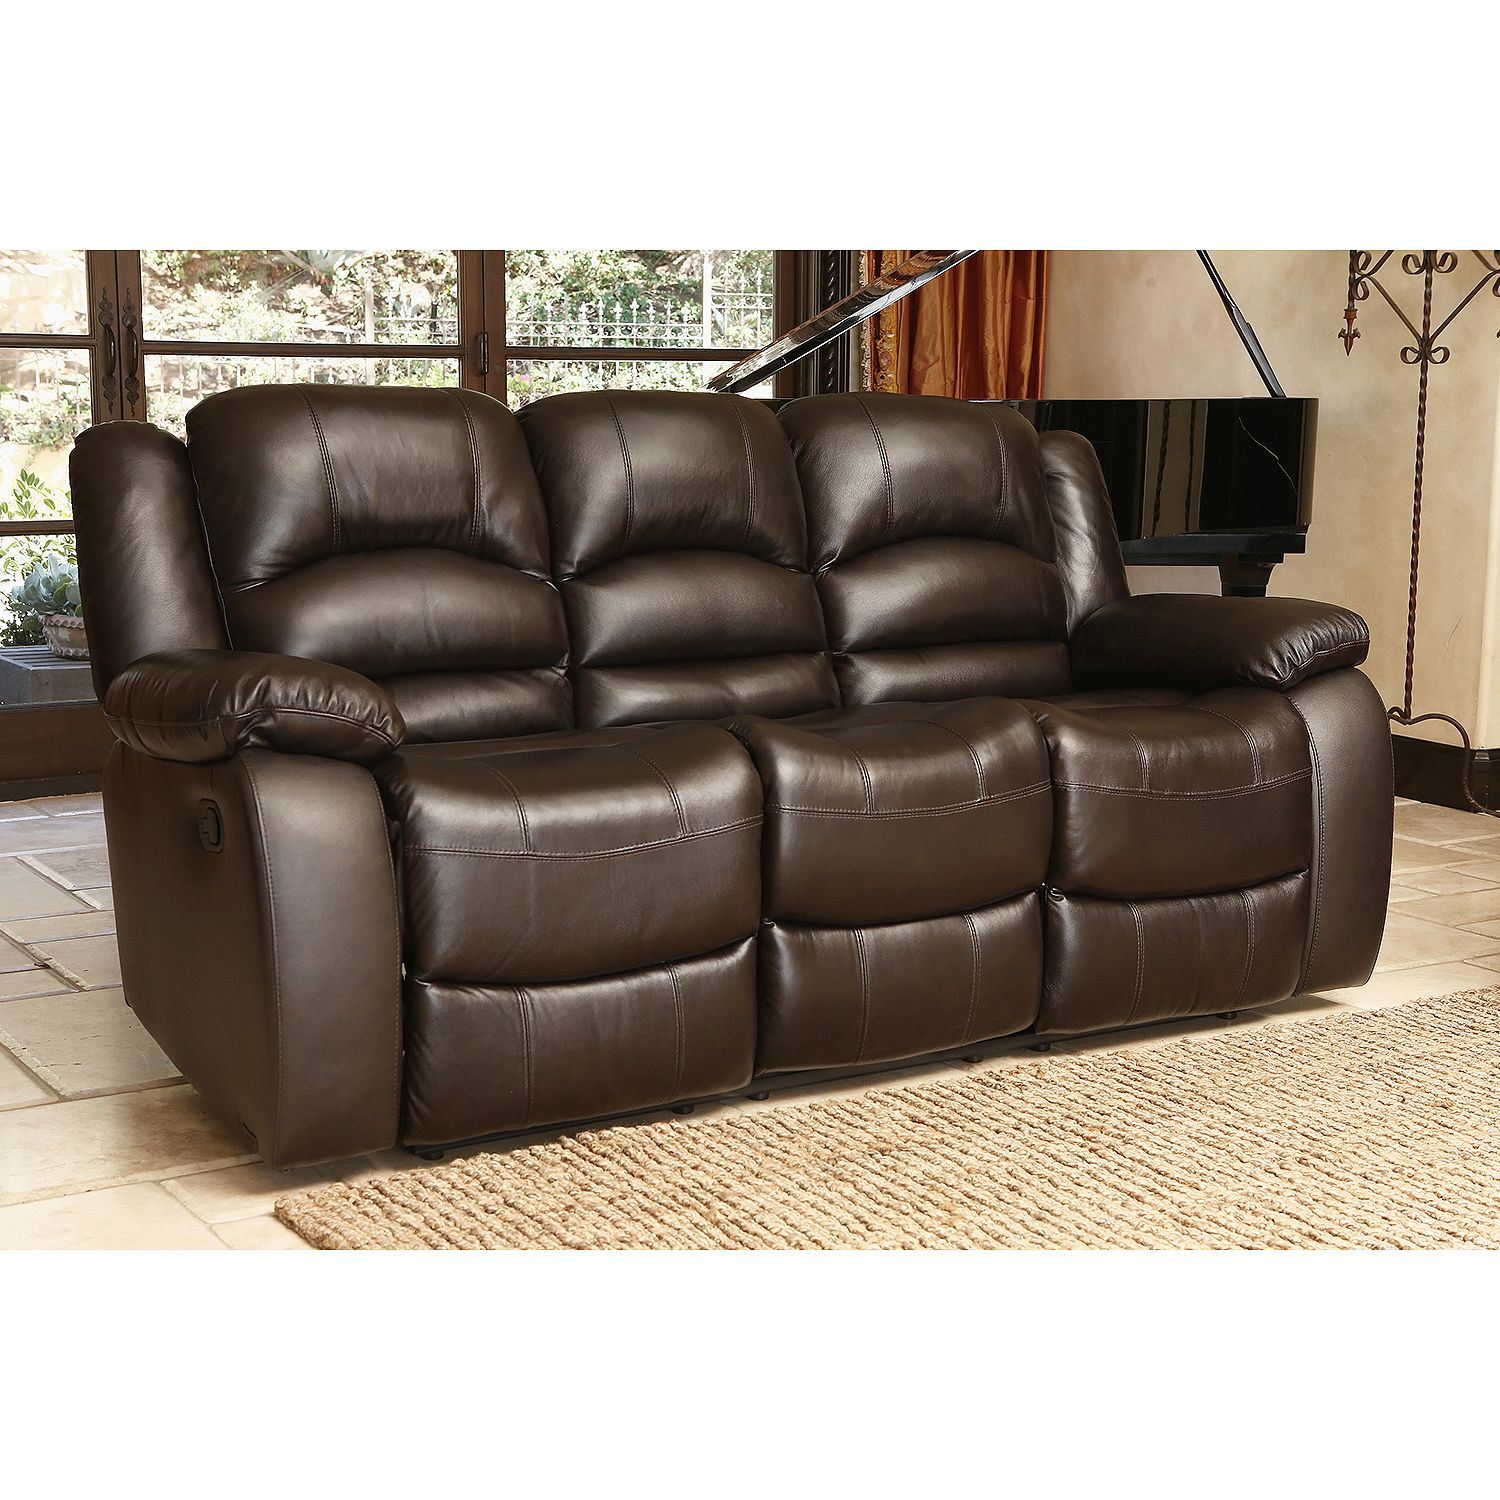 Modern Leather Sofa with Armchair Set Furniture